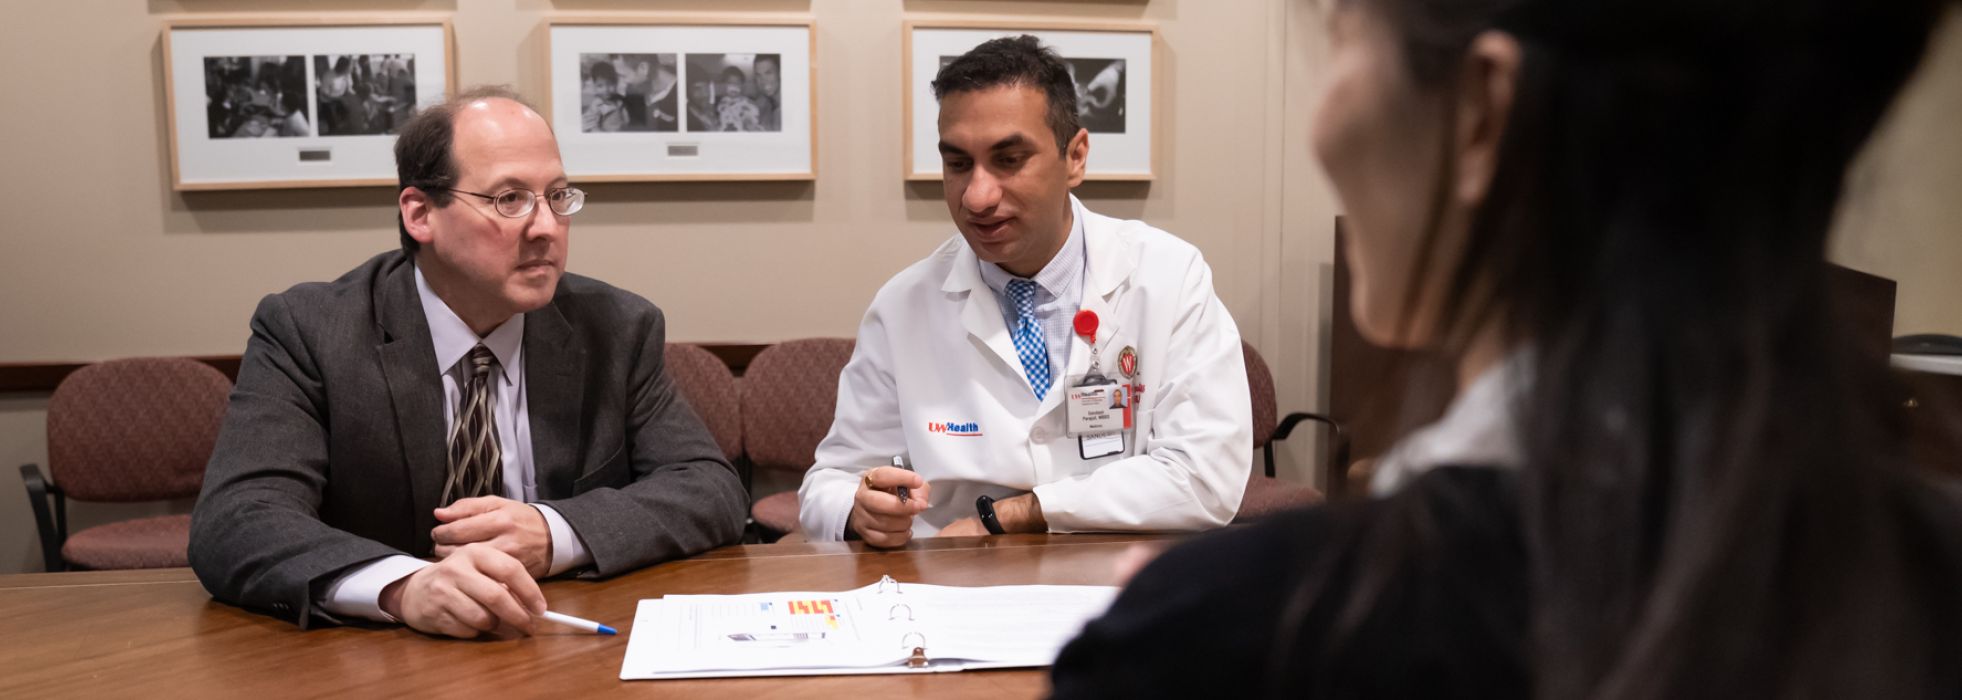 photo of Drs. Brad Astor and Sandesh Parajuli at a table looking at papers